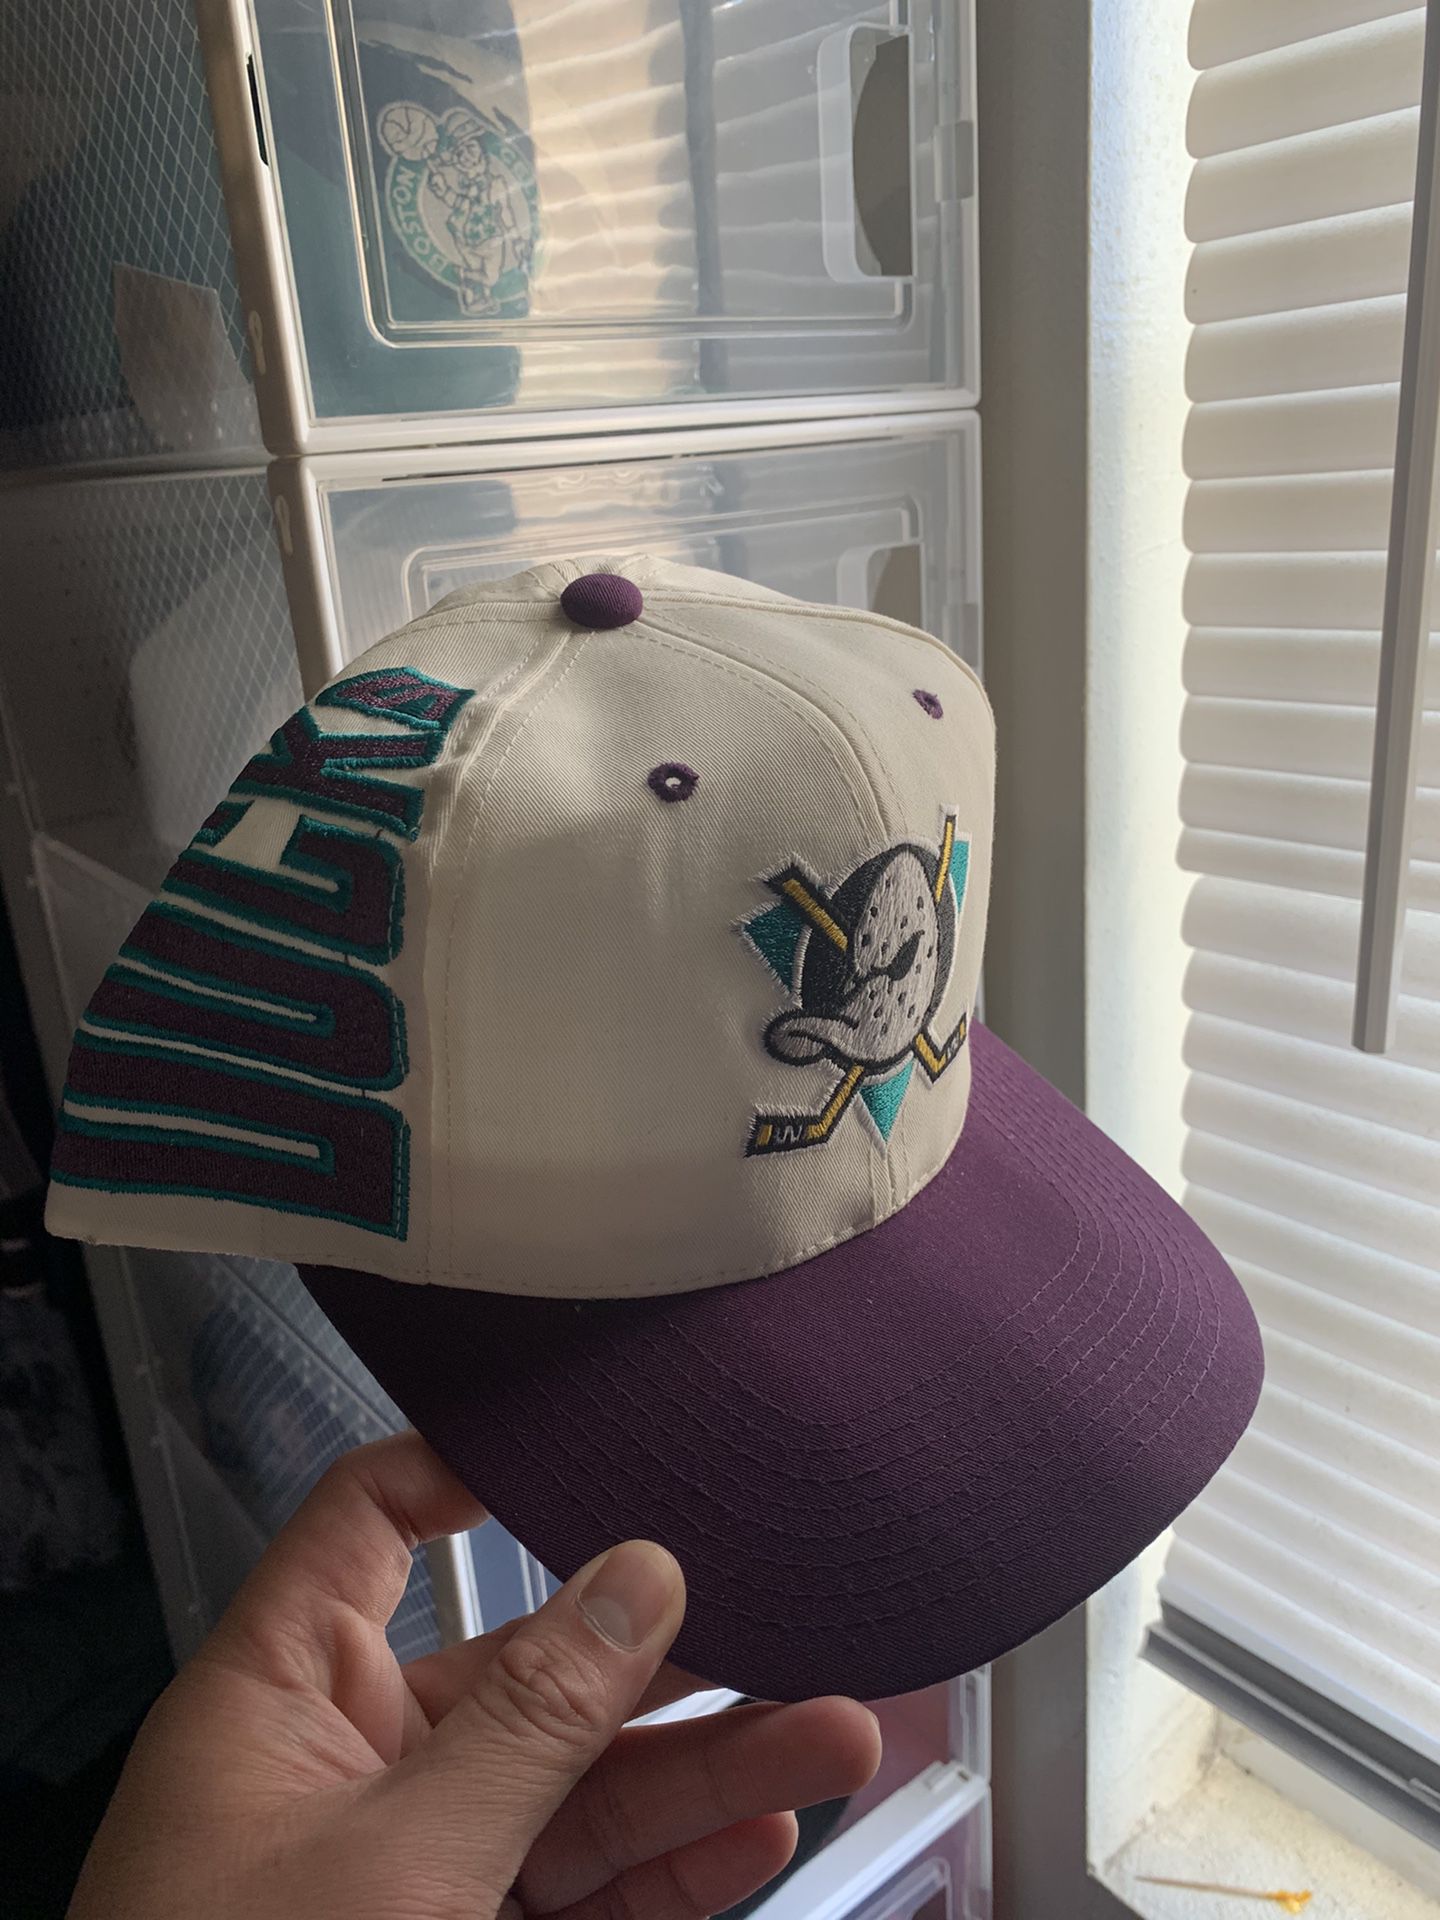 Vintage Mighty Ducks Starter Hat Fitted Size 7-7 3/4 Elastic for Sale in  Glendora, CA - OfferUp